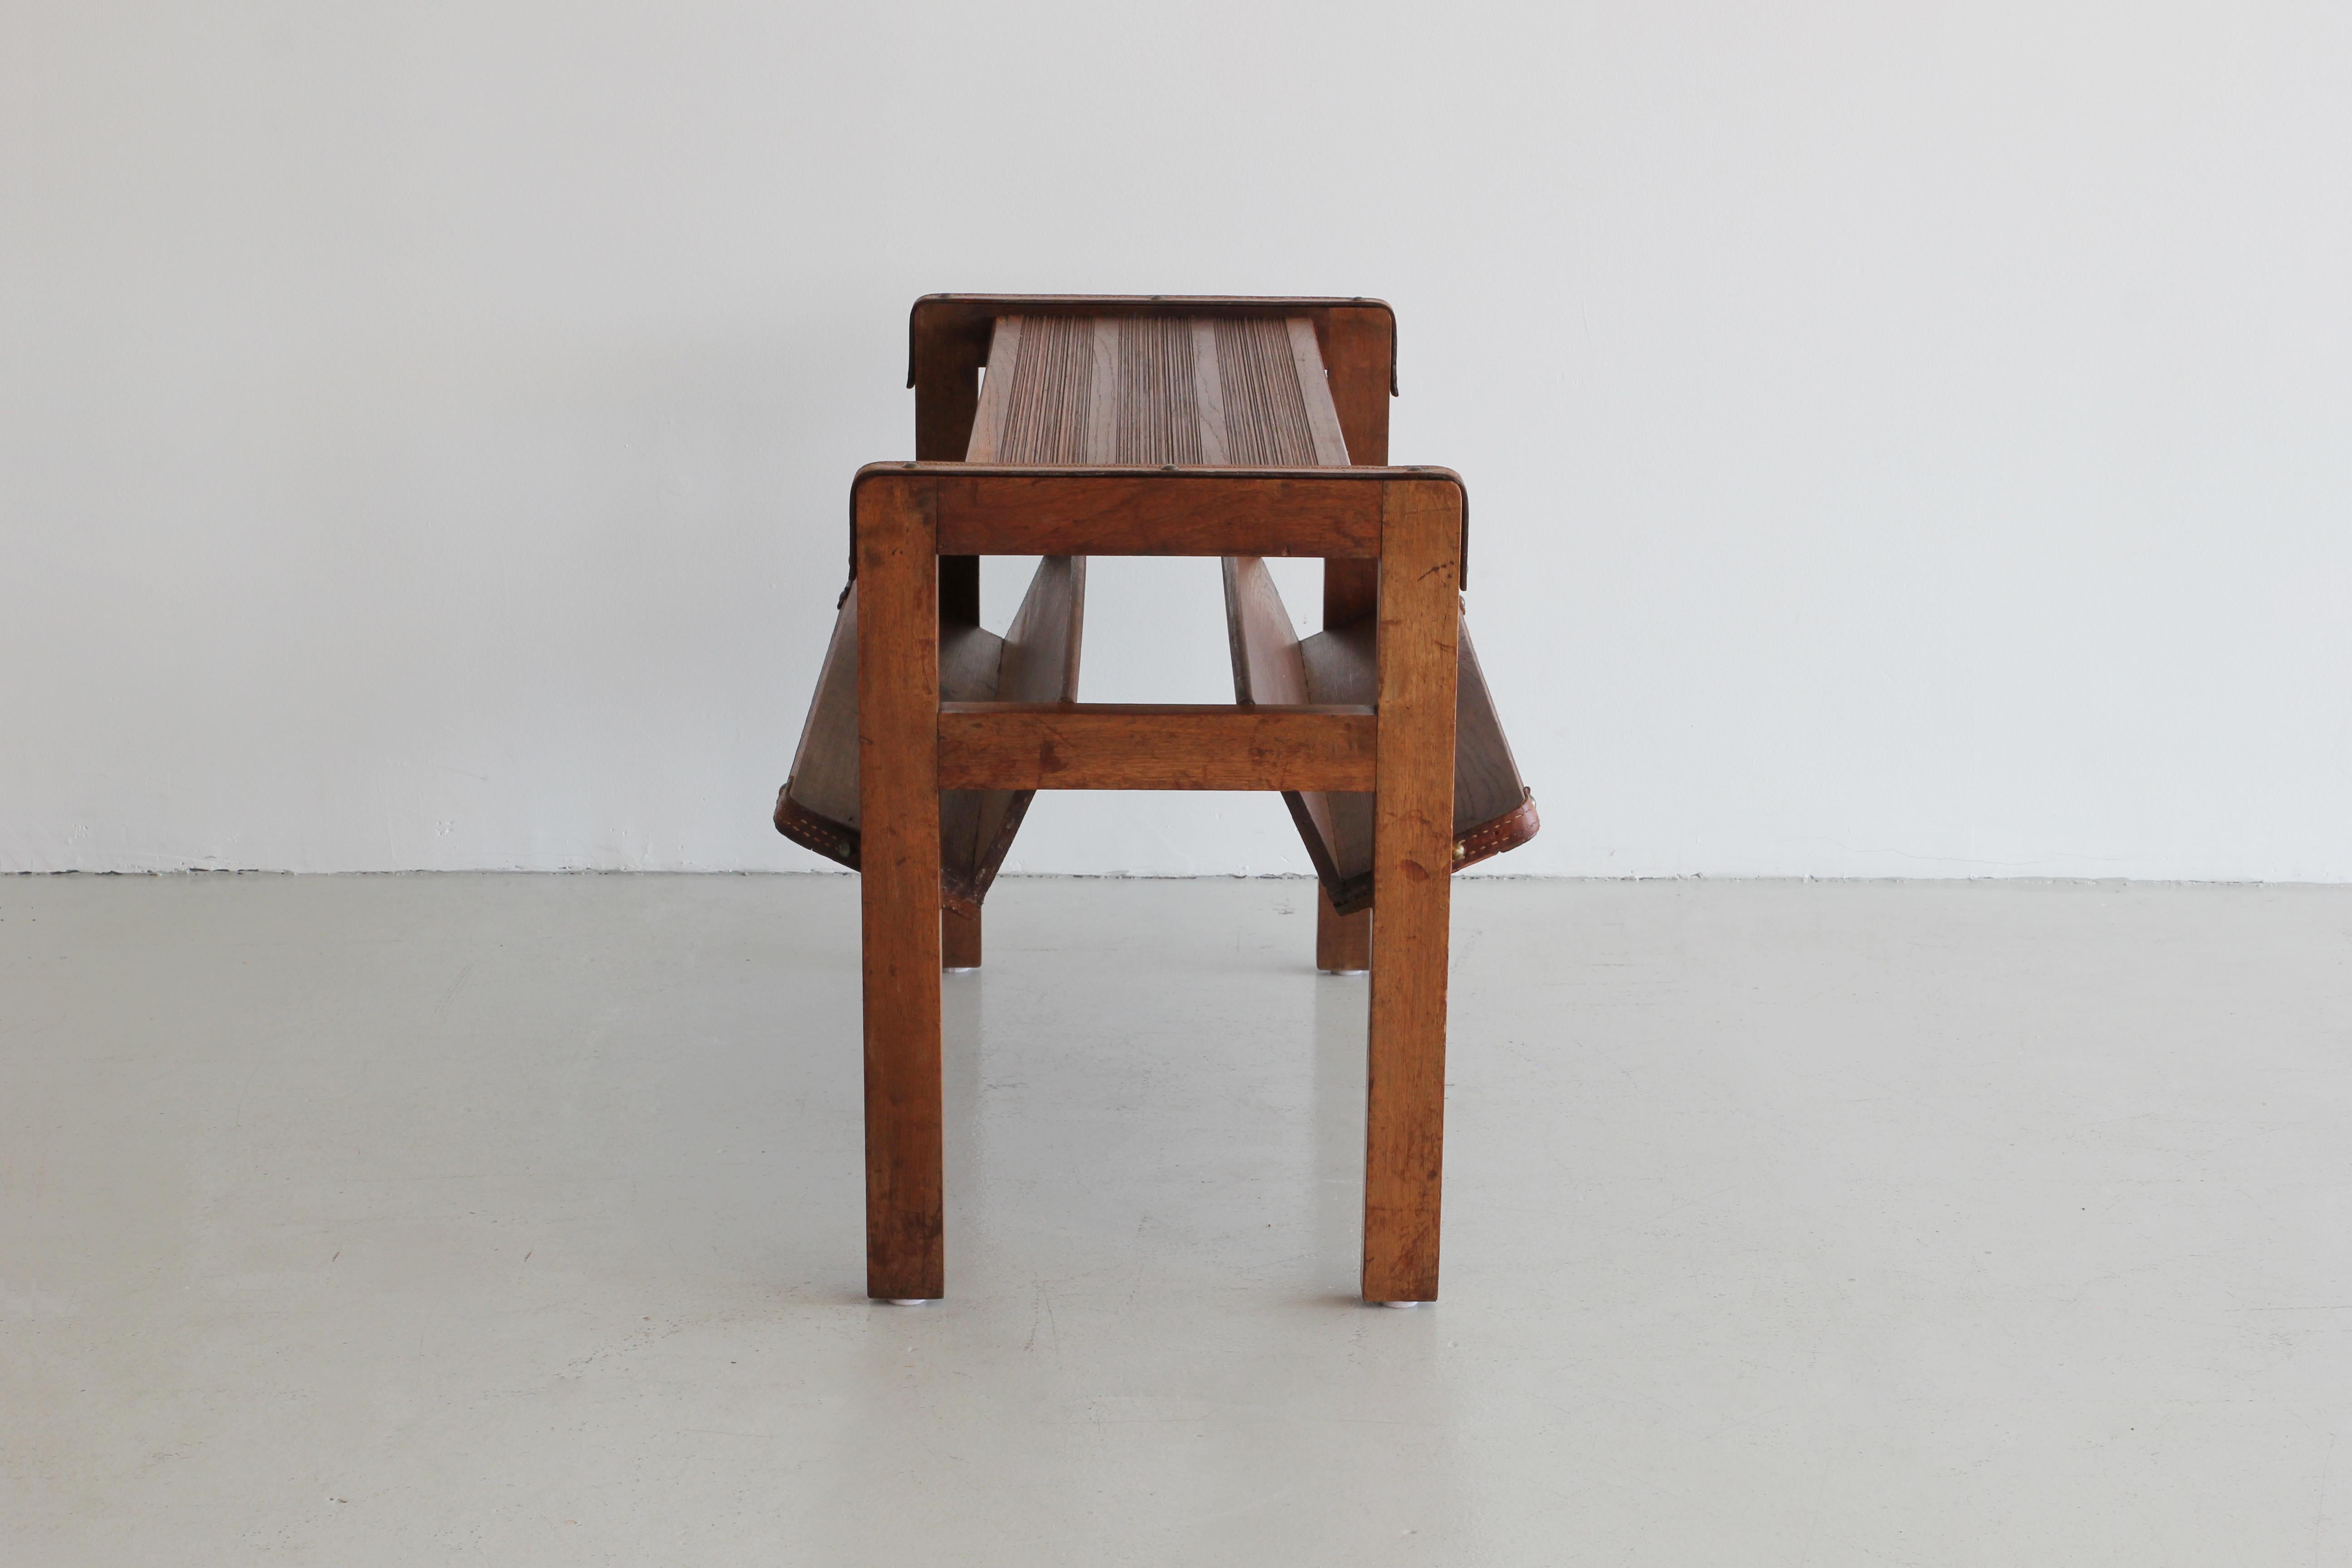 French Wood and Leather Side Table by Jacques Adnet